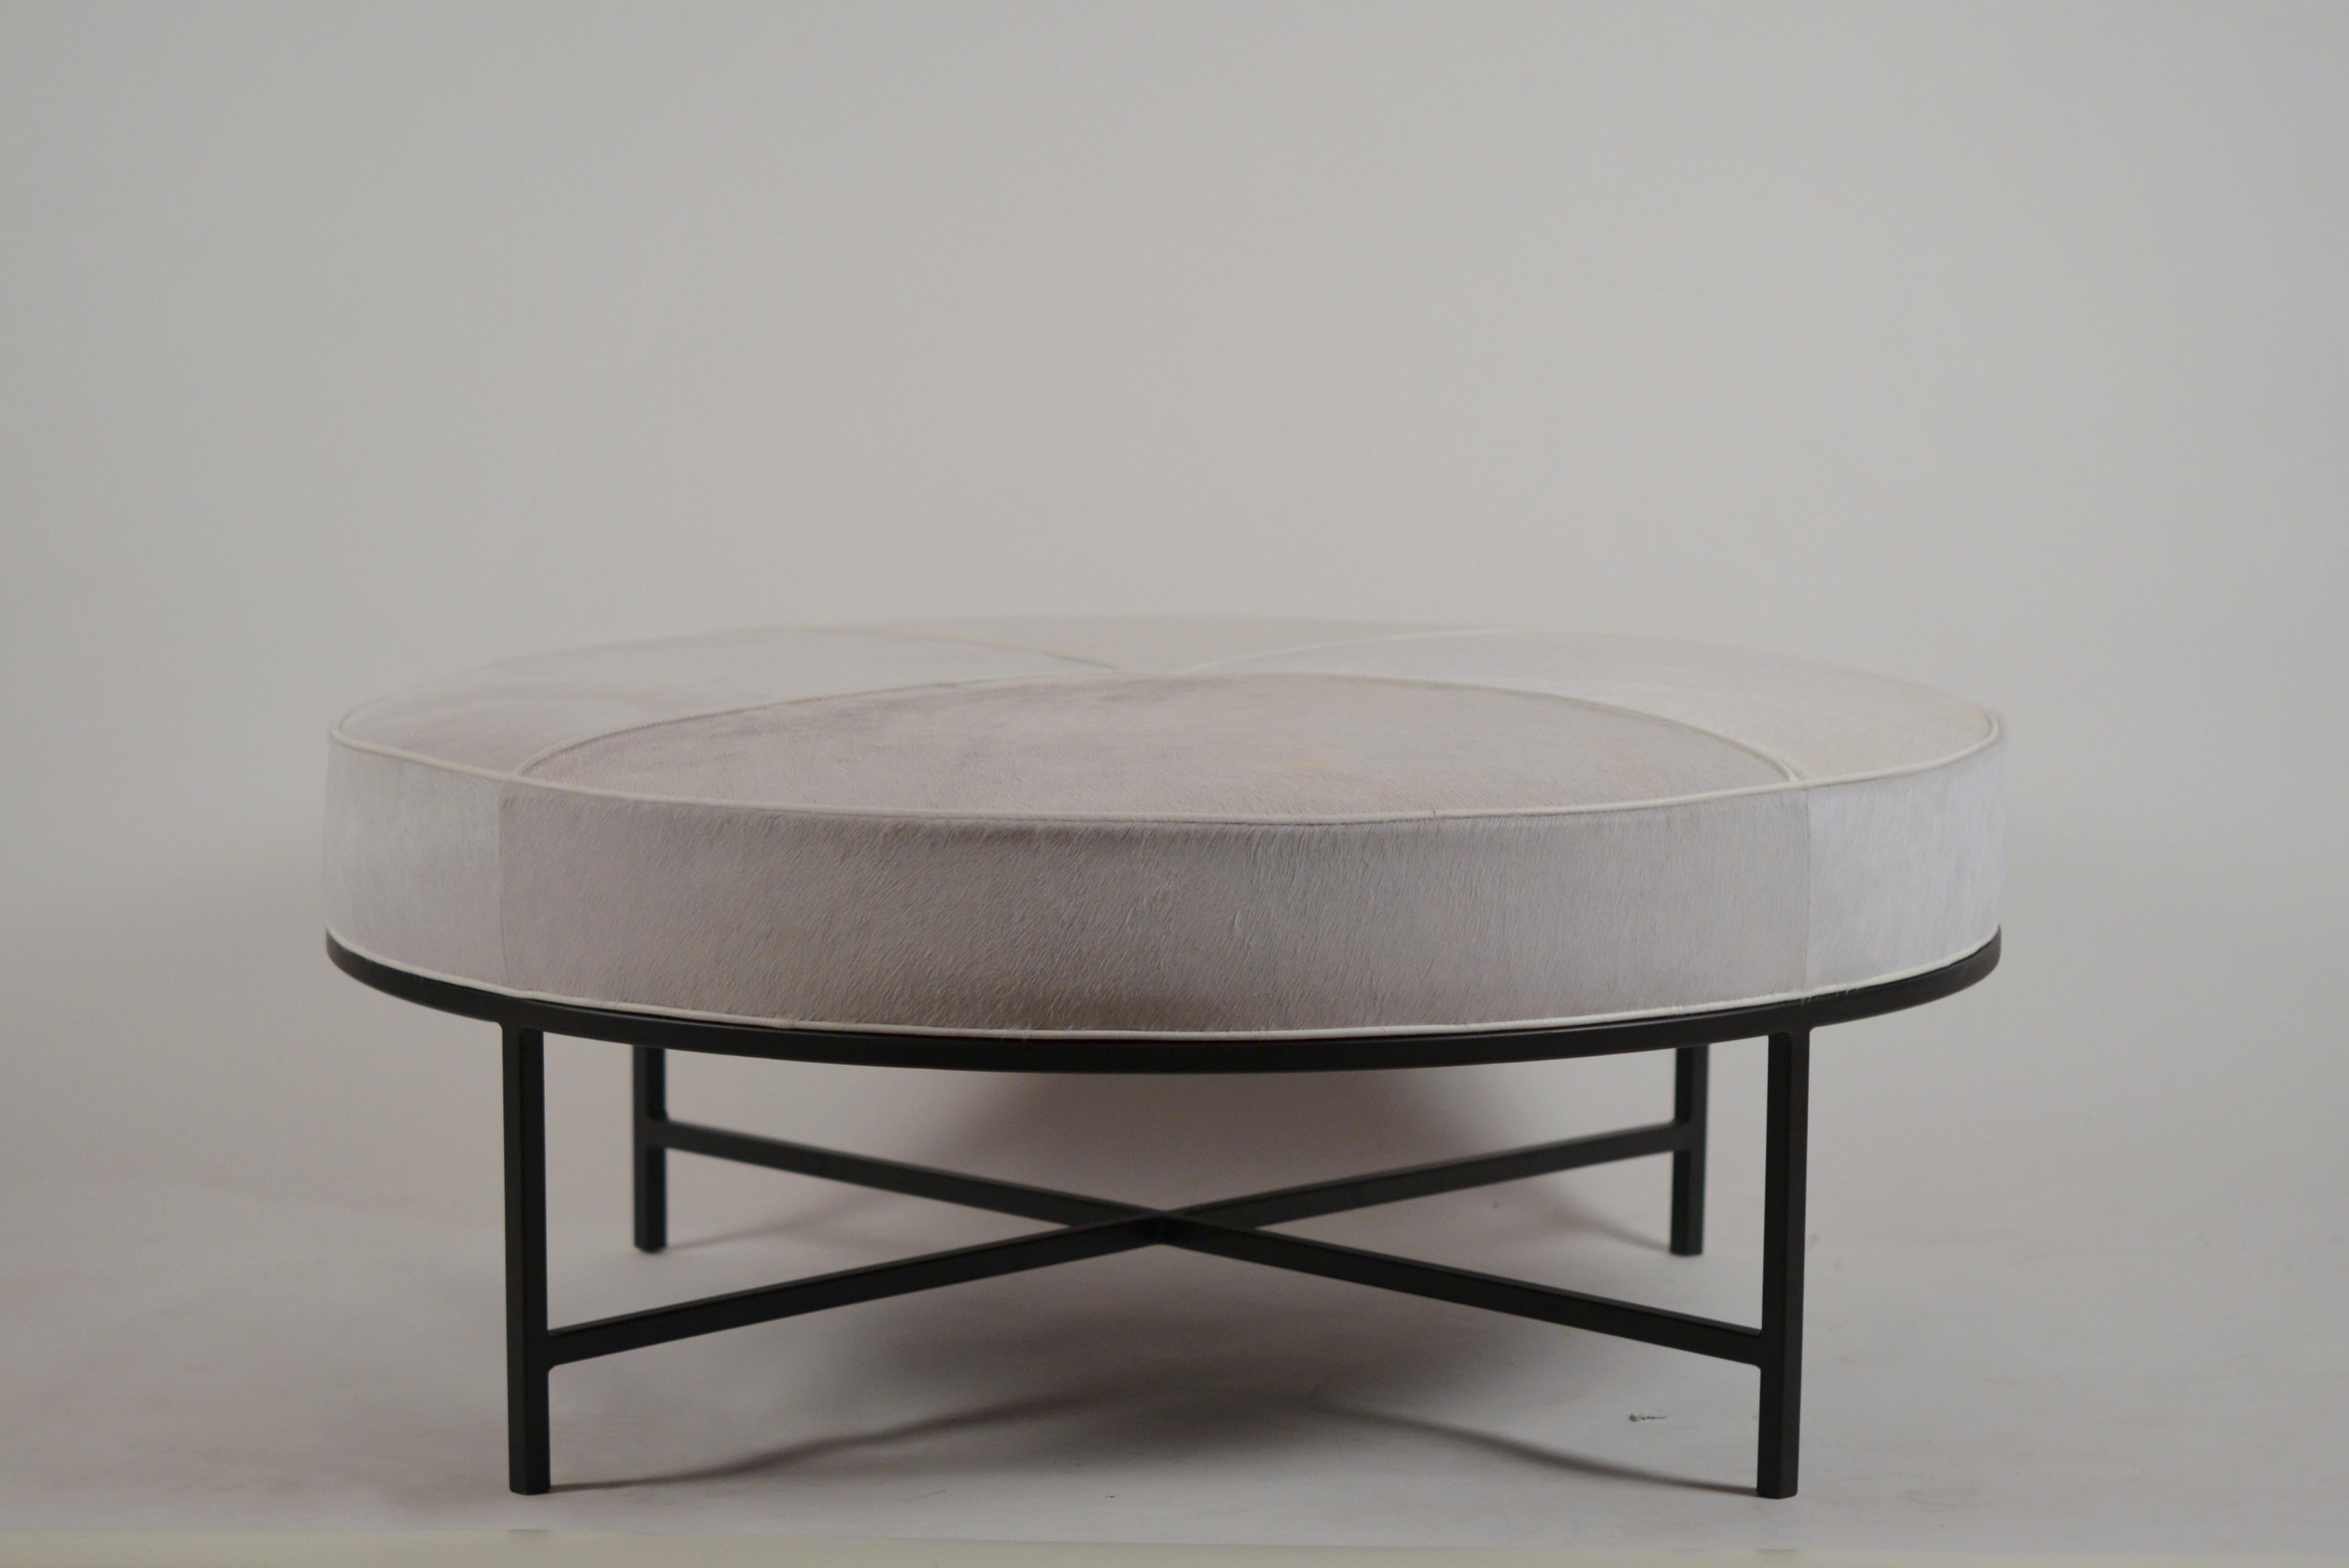 White hide and matte black 'Tambour' round ottoman by Design Frères. Upholstered firm for use as an ottoman / coffee table. Great for dens / media rooms, with books, tray... or feet!